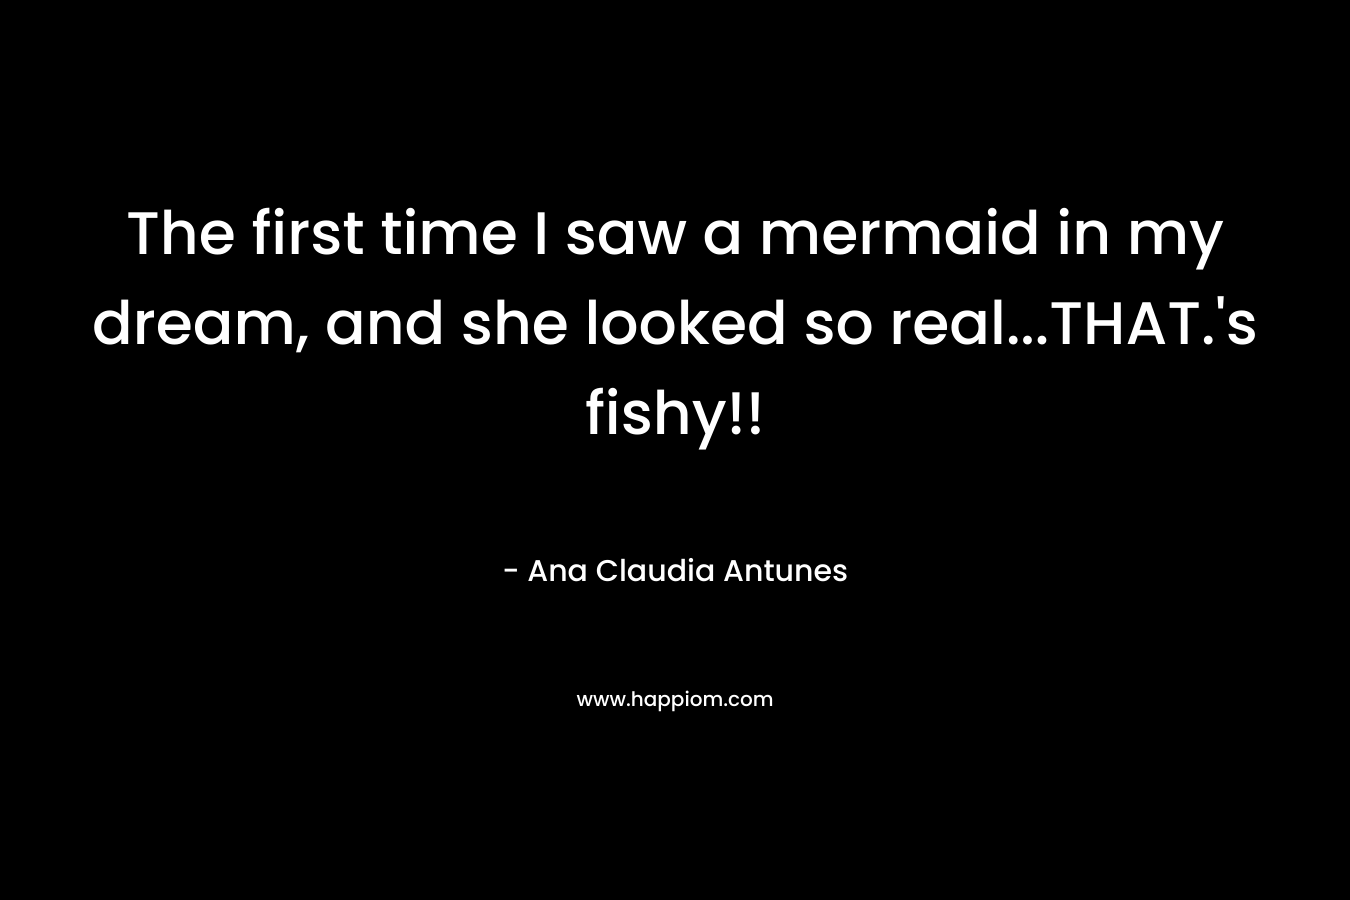 The first time I saw a mermaid in my dream, and she looked so real…THAT.’s fishy!! – Ana Claudia Antunes